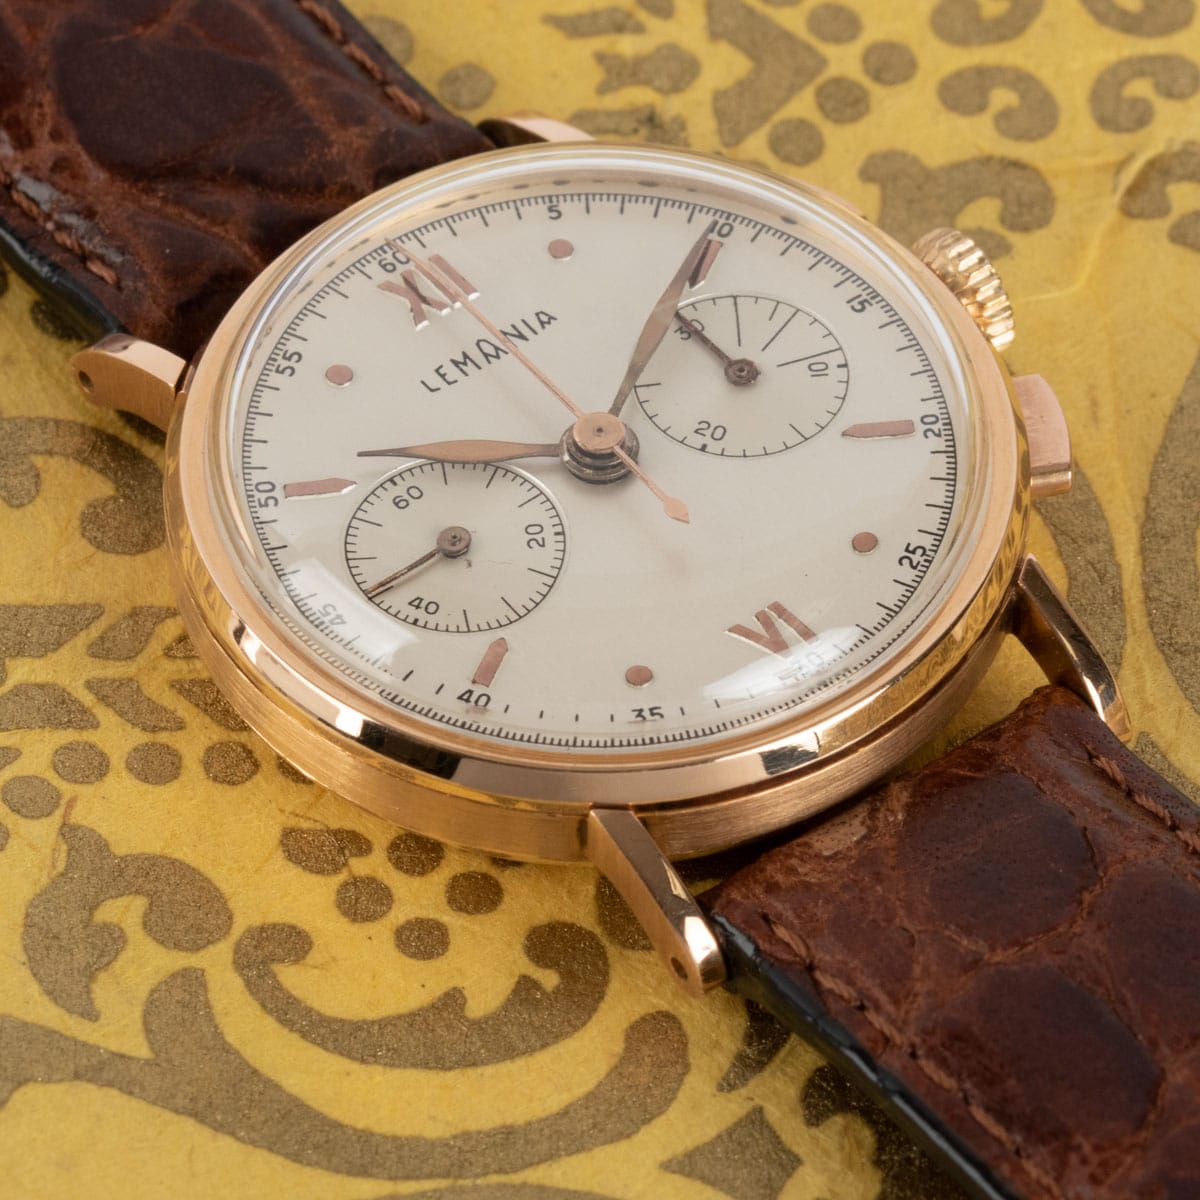 Extra Shot of Vintage Chronograph